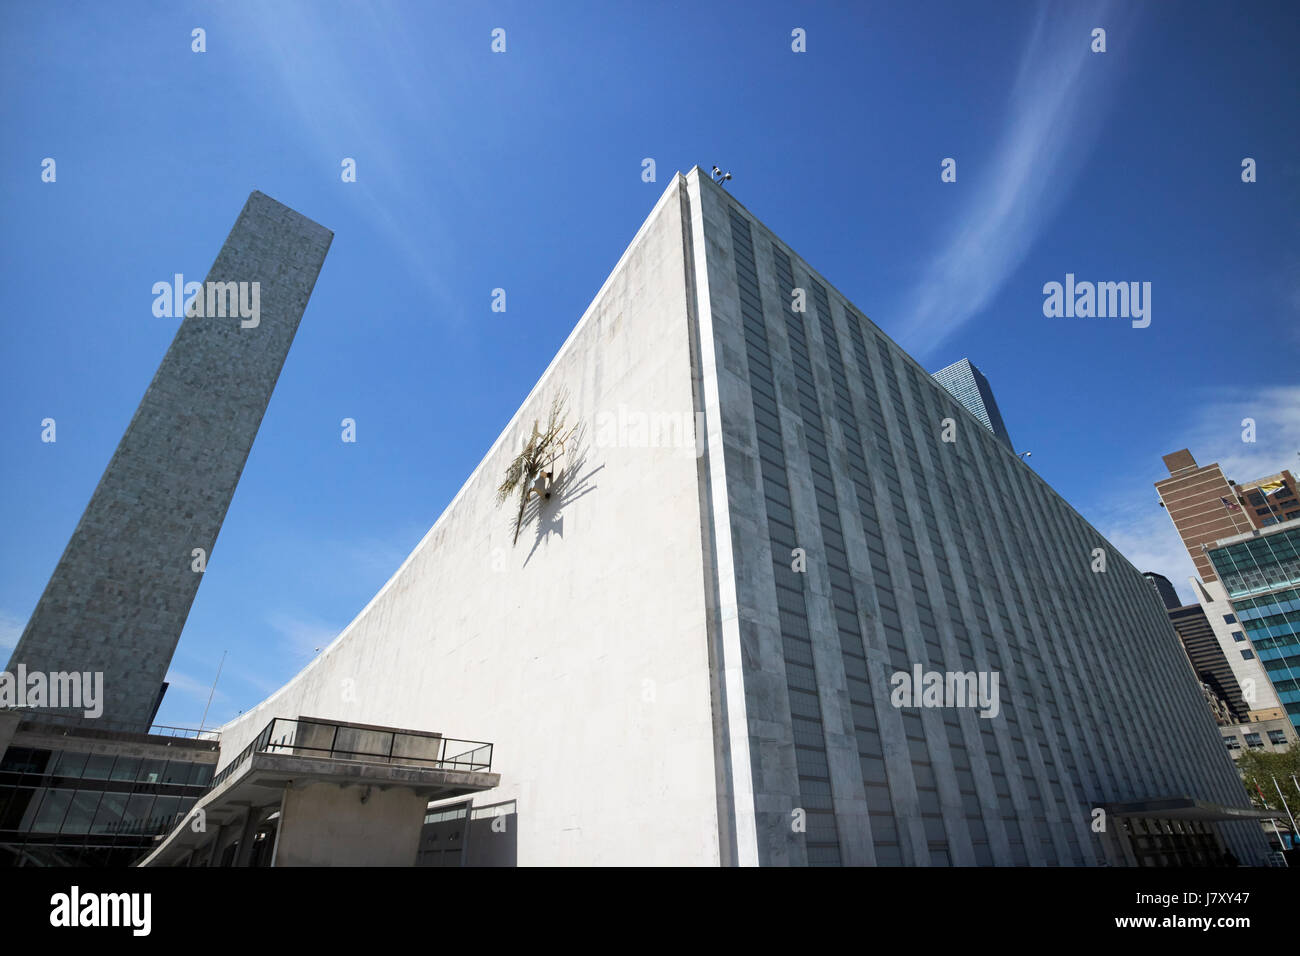 The general assembly and secretariat buildings at the United Nations headquarters building New York City USA Stock Photo